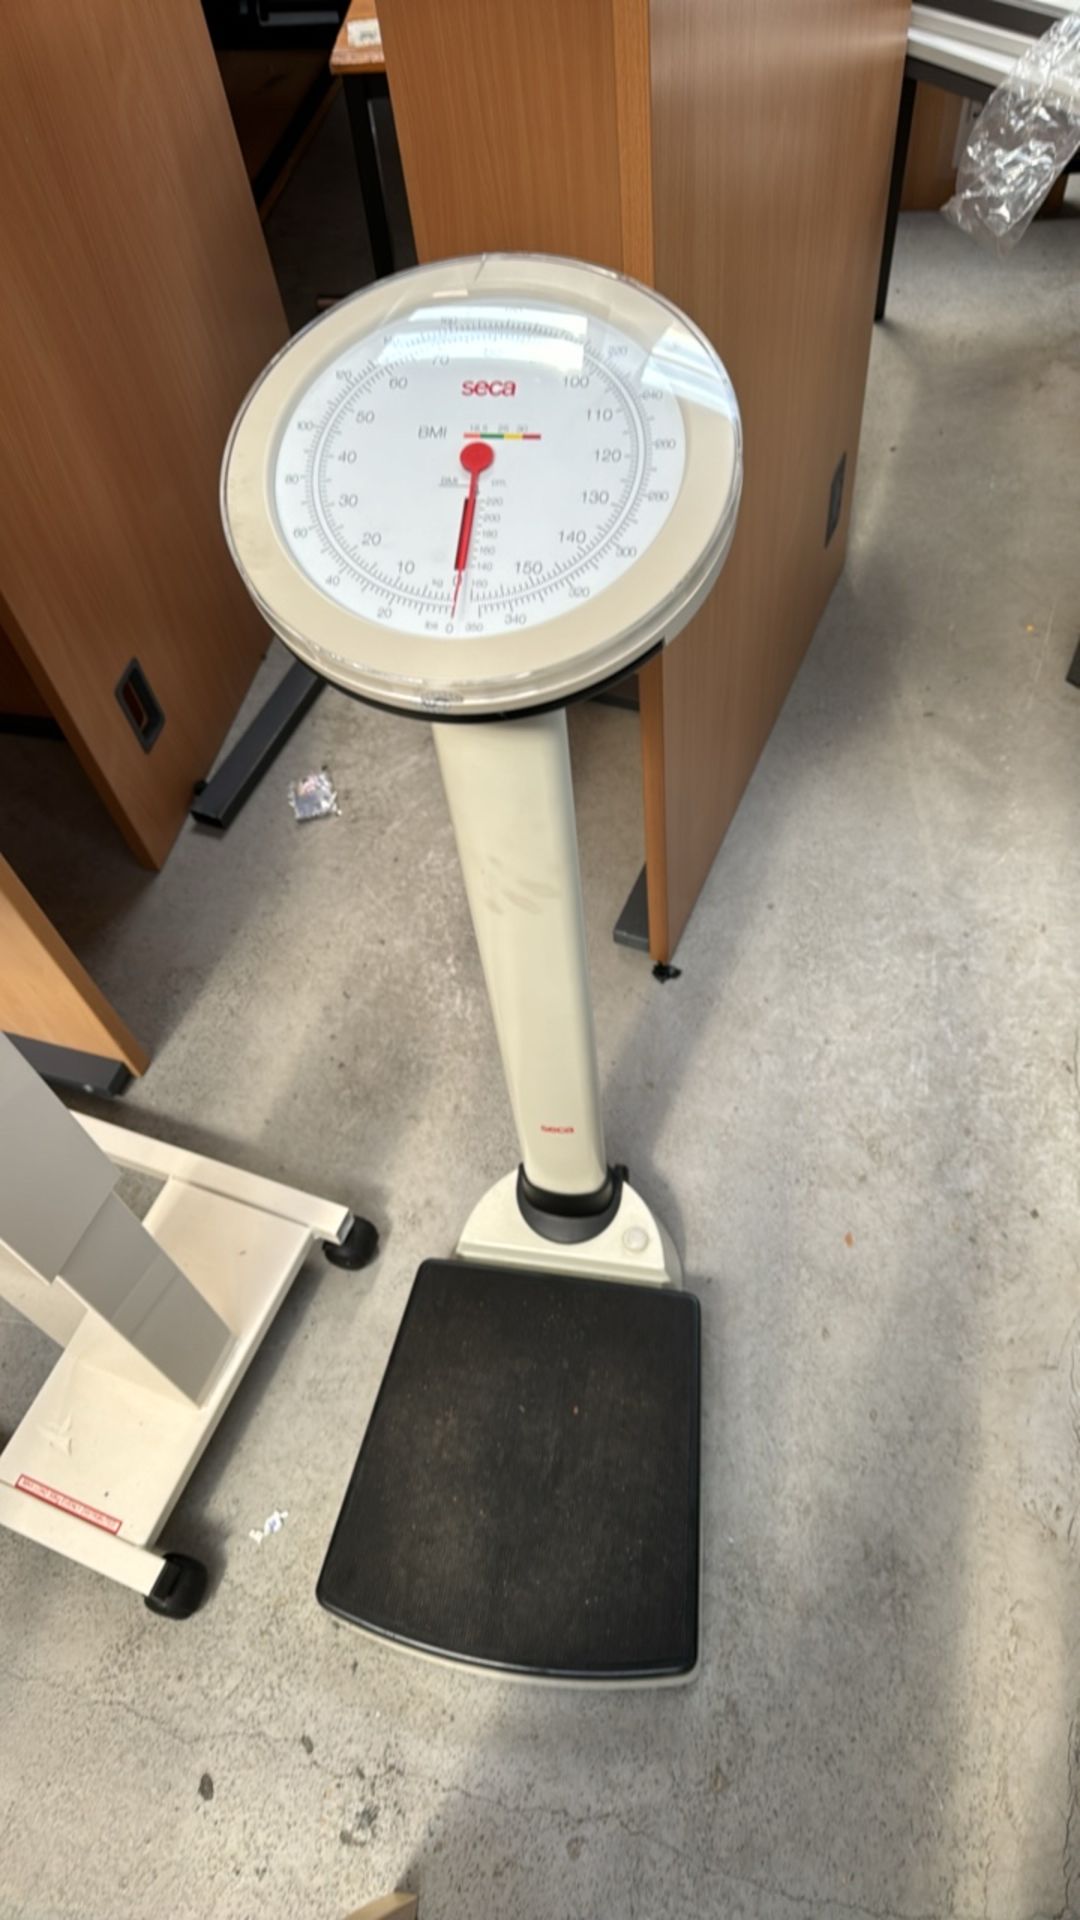 Seca Weighing Scales - Image 2 of 3